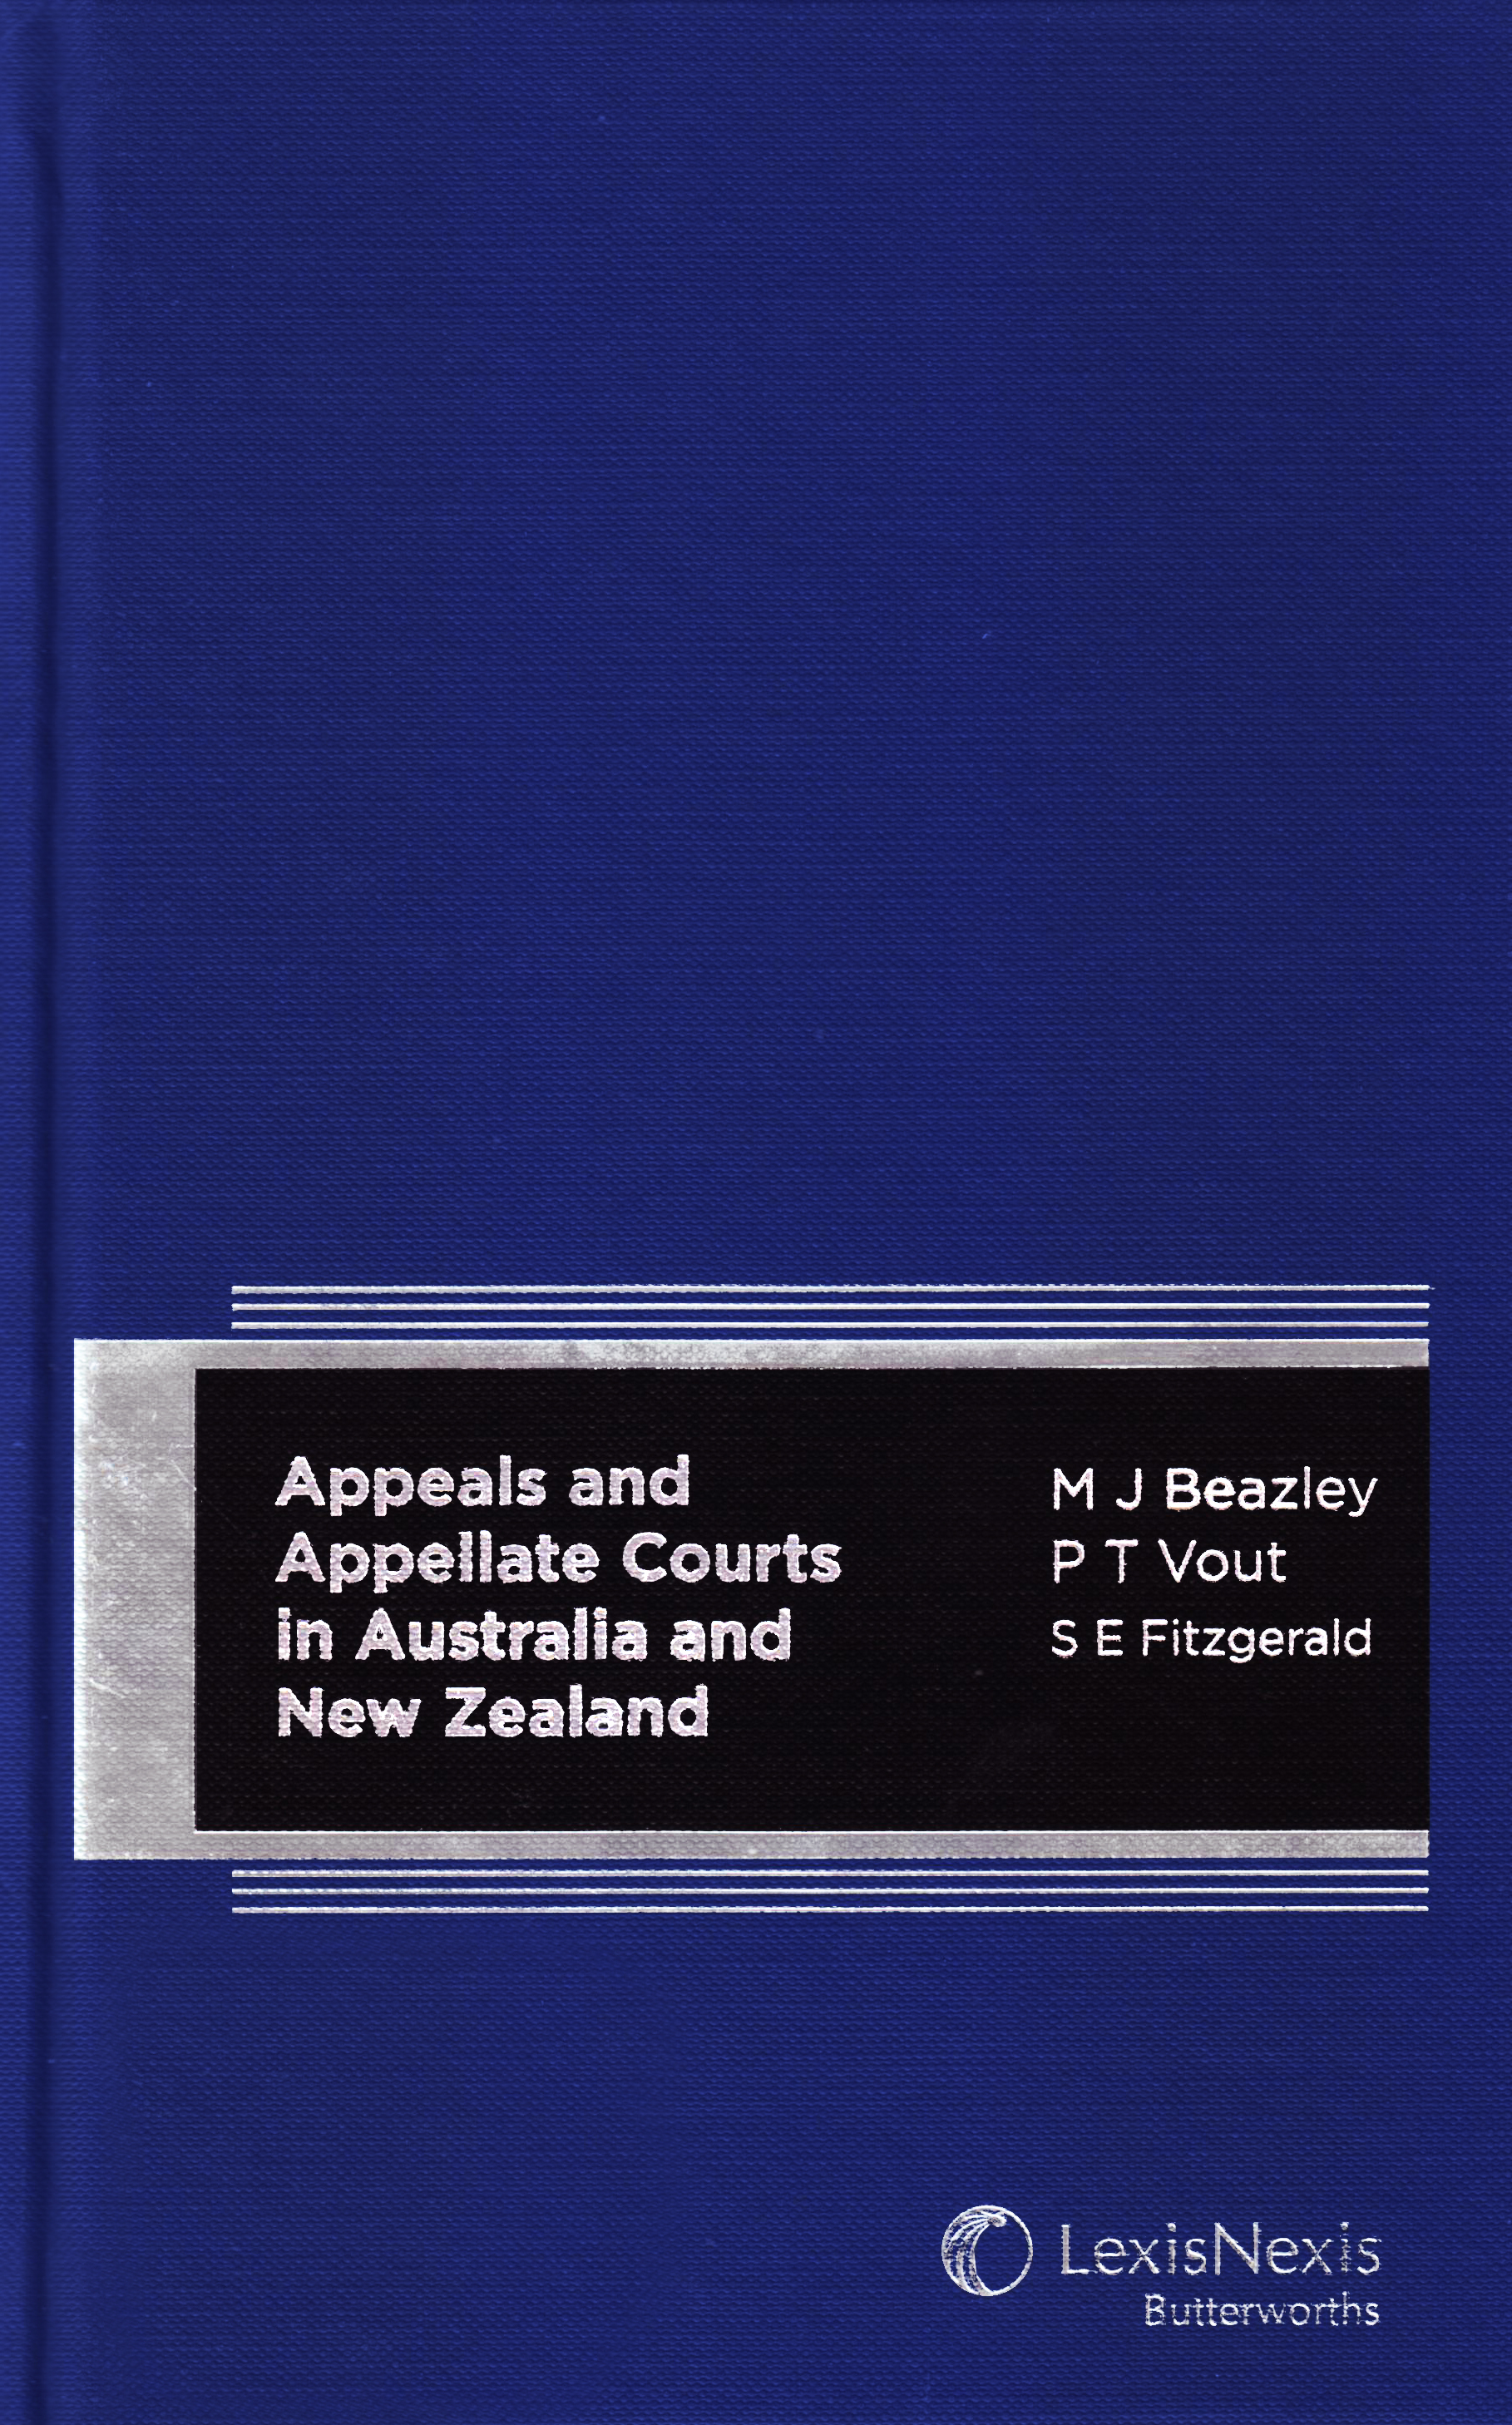 Appeals & Appellate Courts in Australia and New Zealand